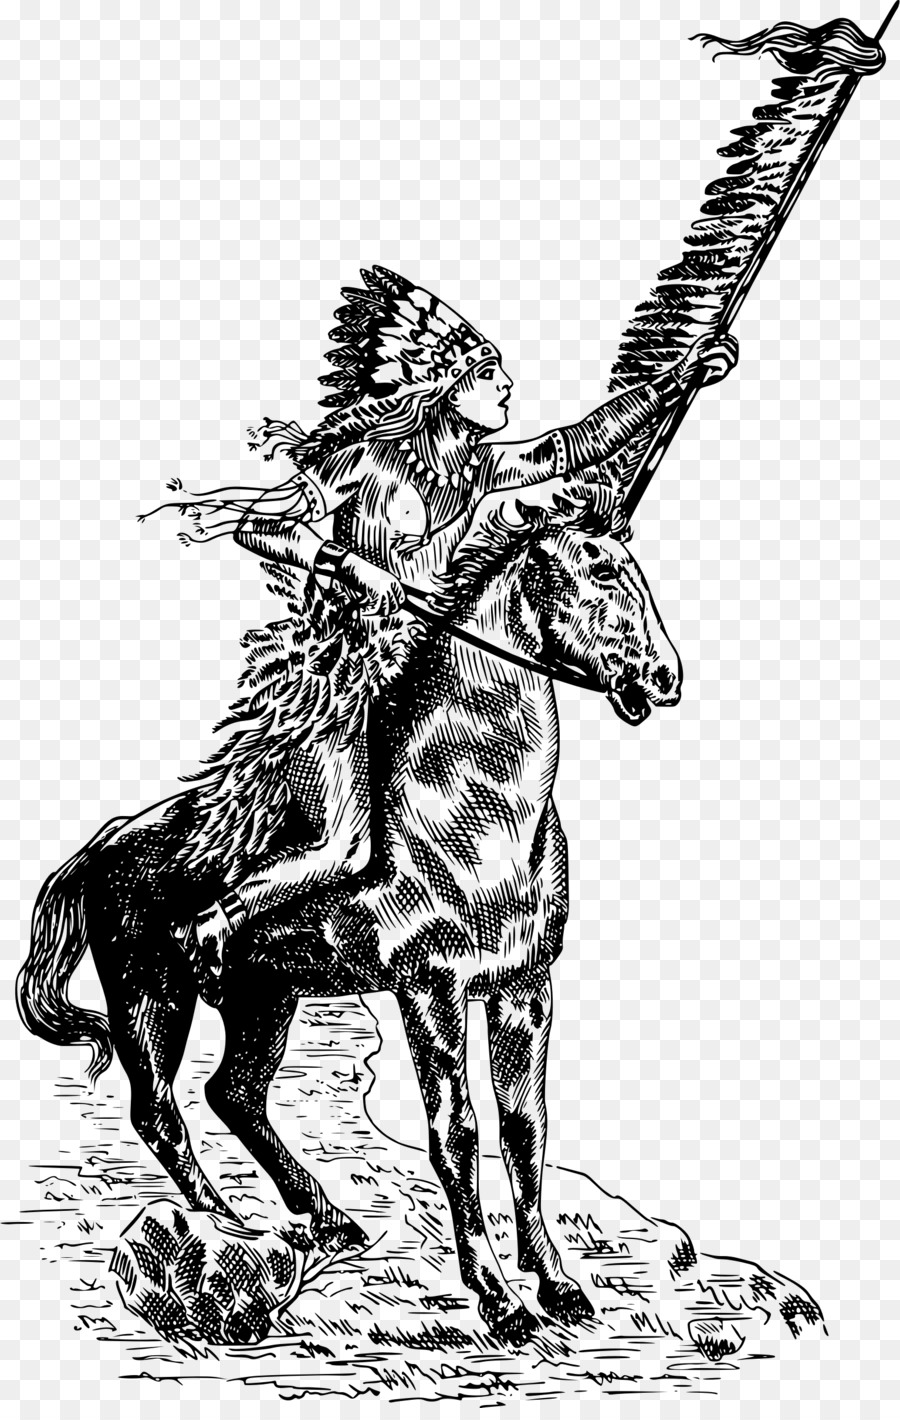 American Indian Horse Native Americans in the United States Indigenous peoples of the Americas Cree Clip art - native png download - 1534*2400 - Free Transparent American Indian Horse png Download.